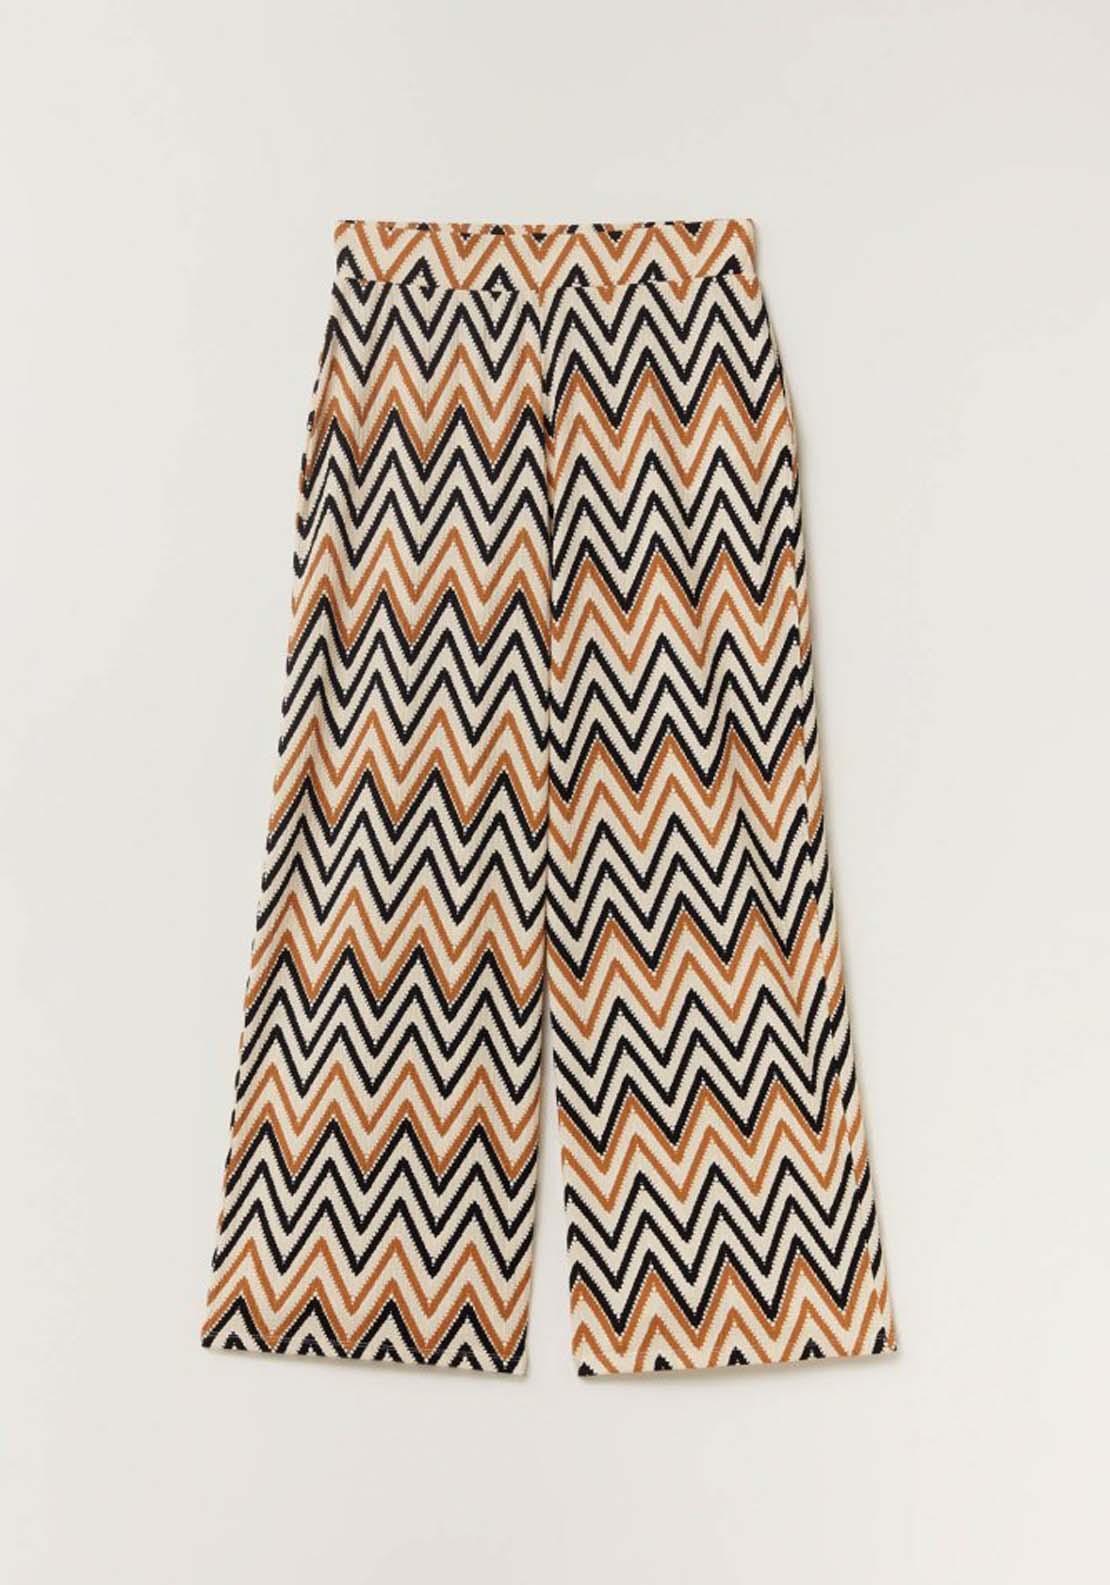 Sfera Zig-zag structured trousers - Yellow 5 Shaws Department Stores